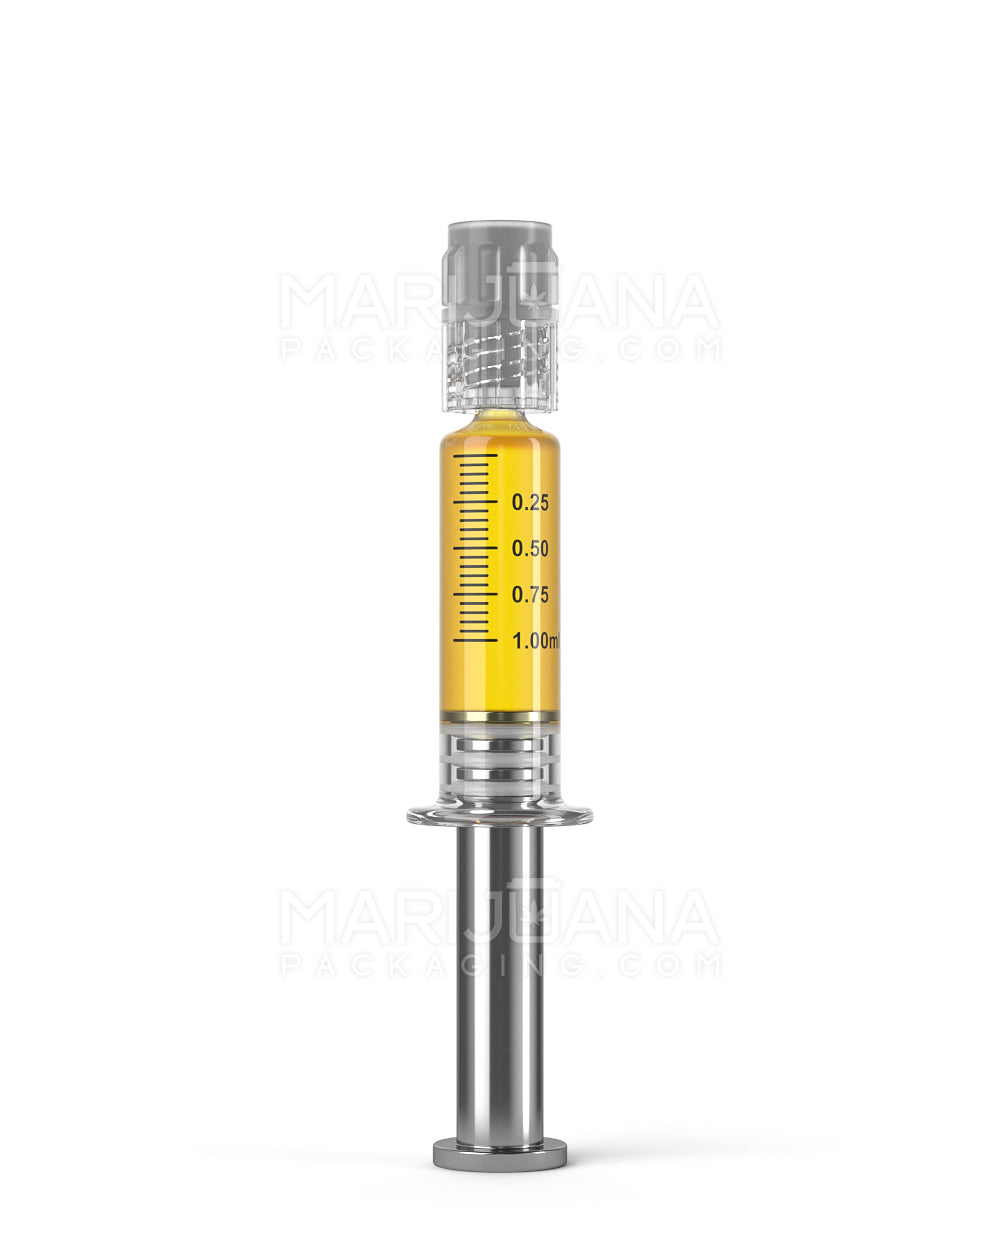 Luer Lock | Glass Dab Applicator Syringes w/ Metal Plunger | 1mL - 0.25mL Increments | Sample - 2